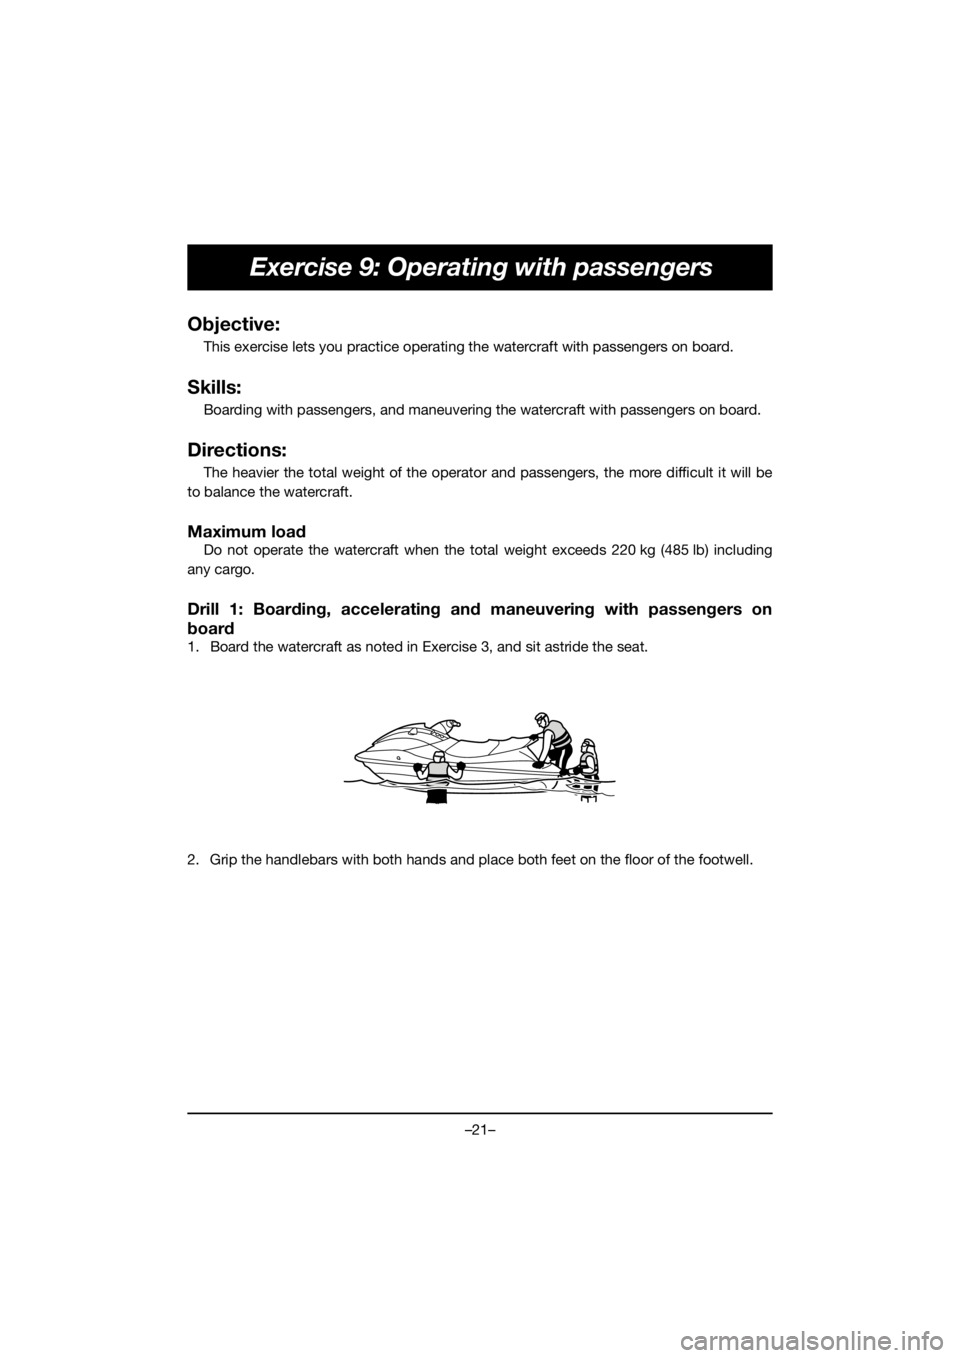 YAMAHA EX SPORT 2020  Notices Demploi (in French) –21–
Exercise 9: Operating with passengers
Objective:
This exercise lets you practice operating the watercraft with passengers on board.
Skills:
Boarding with passengers, and maneuvering the water